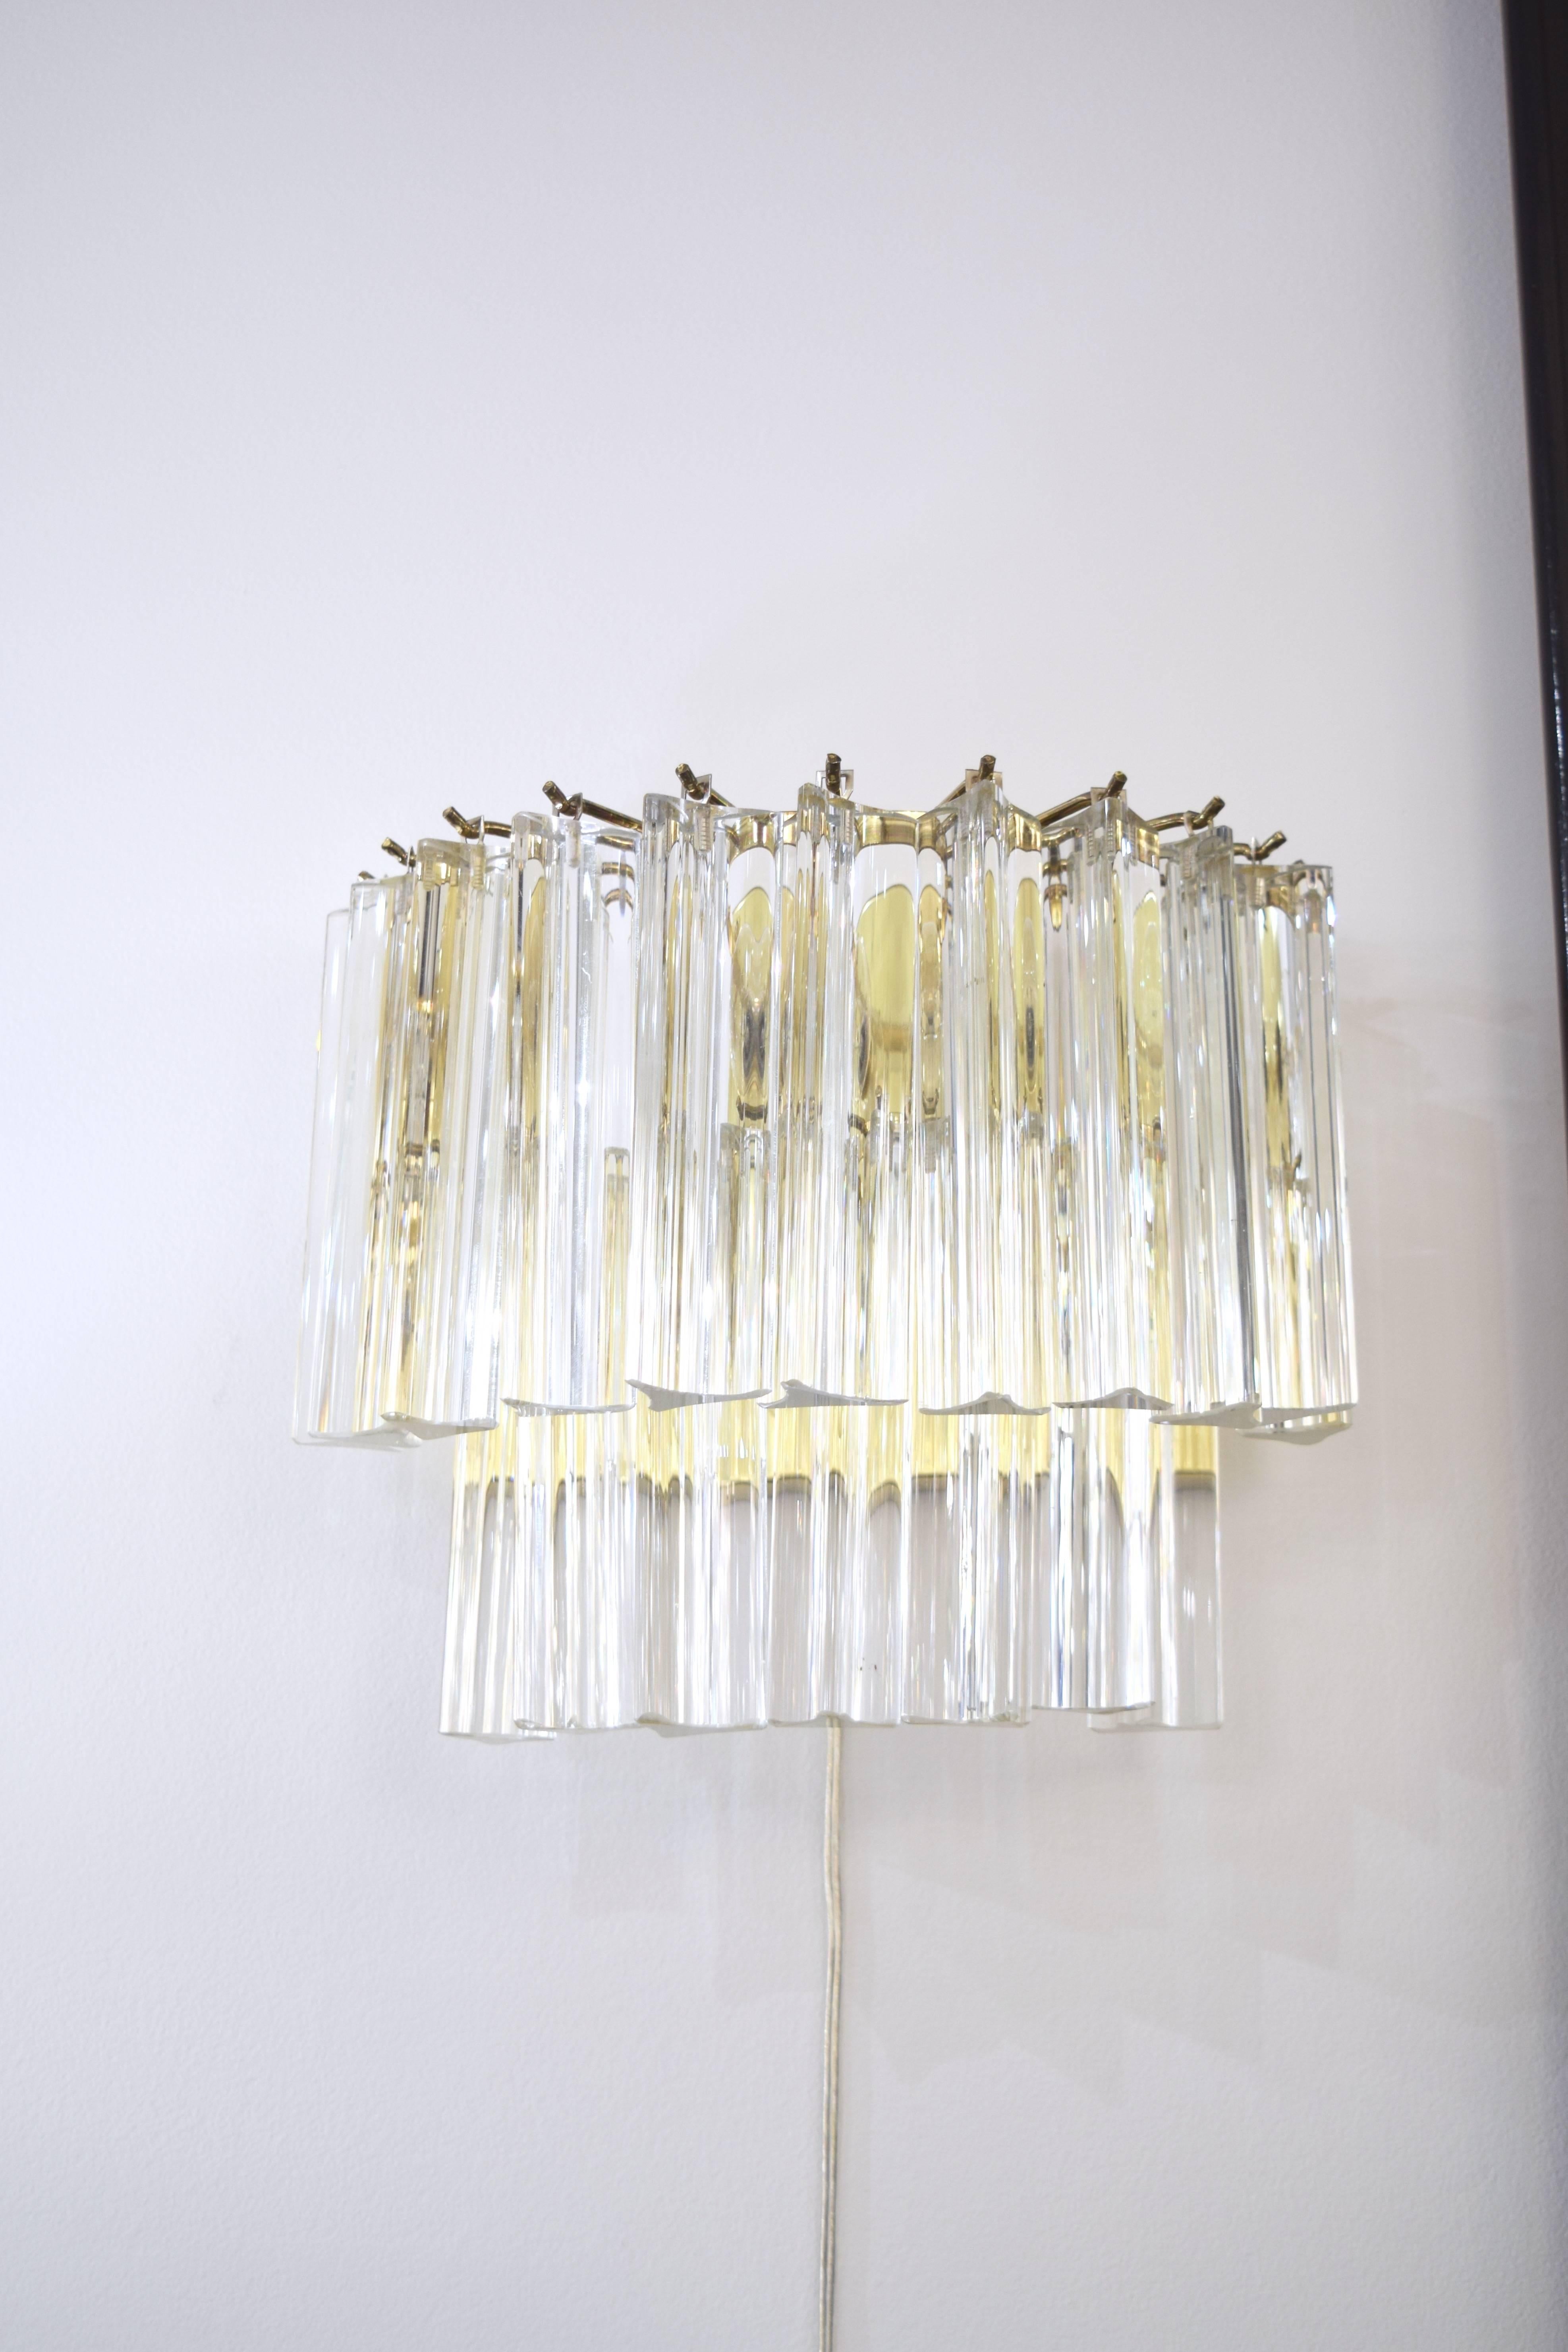 Pair of Italian sconces by Venini with two-tier of hanging glass prisms with a brass frame featuring three sockets.